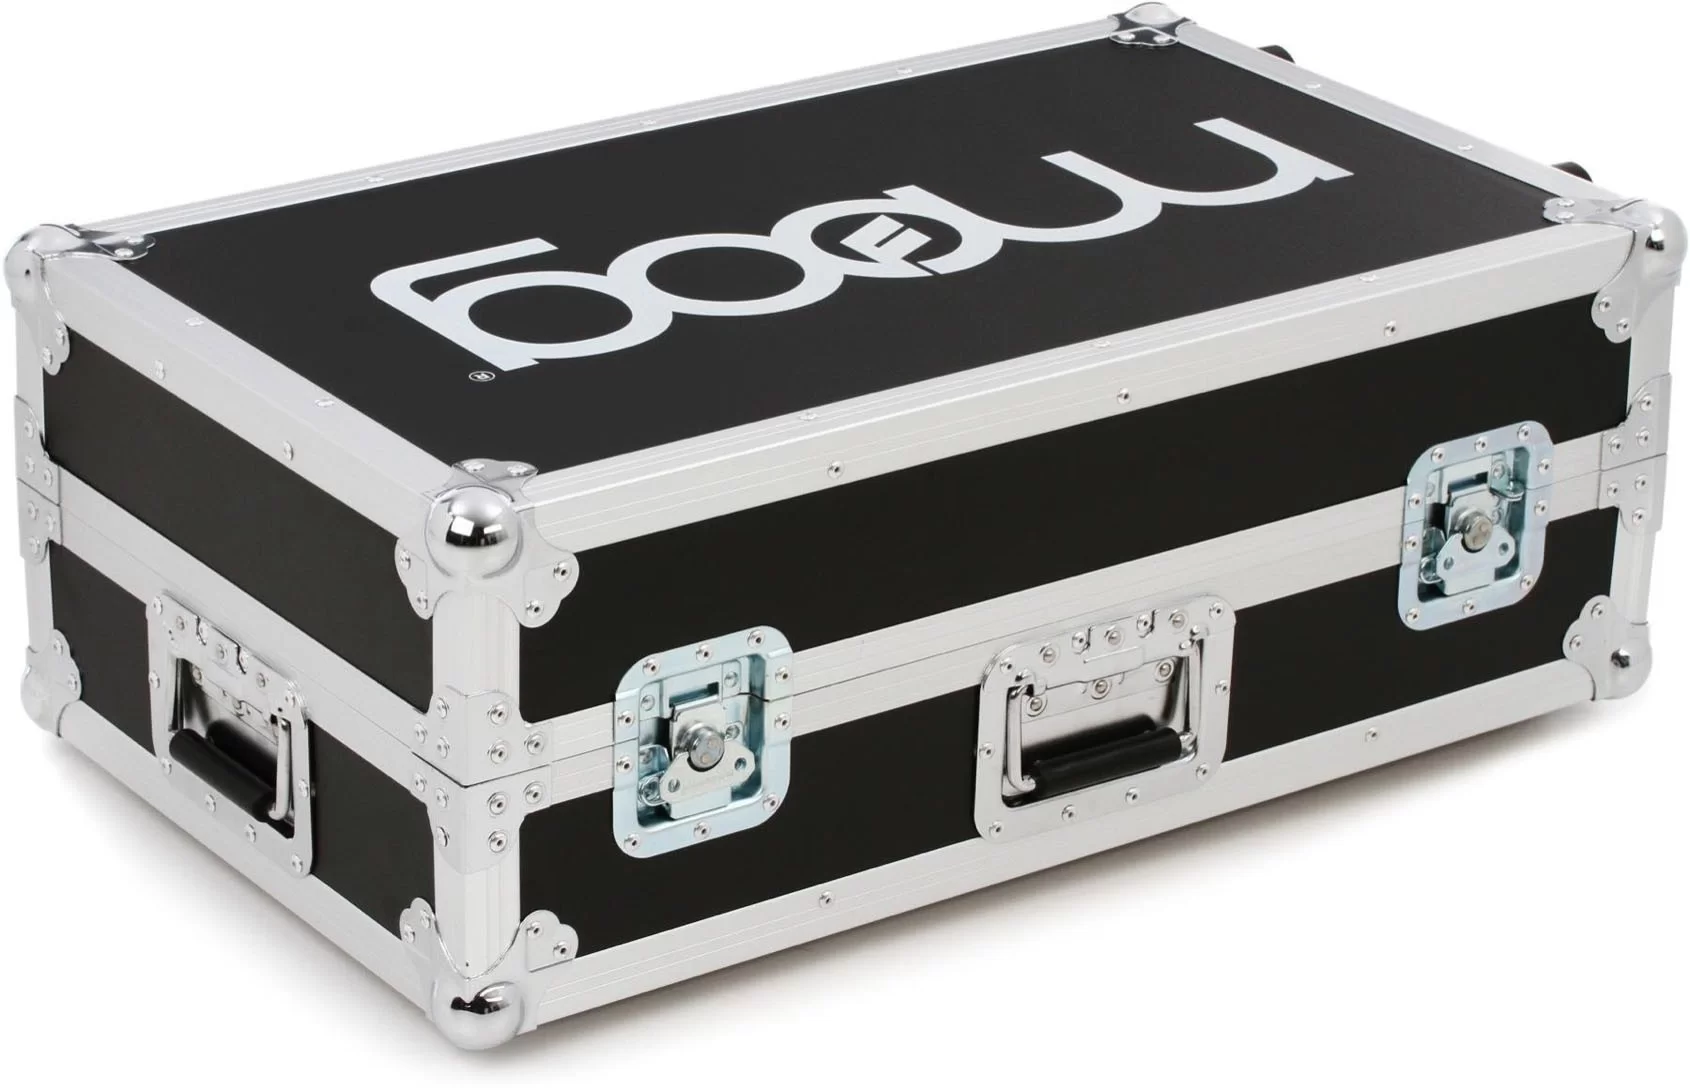 Moog Subsequent 25 ATA Road Case